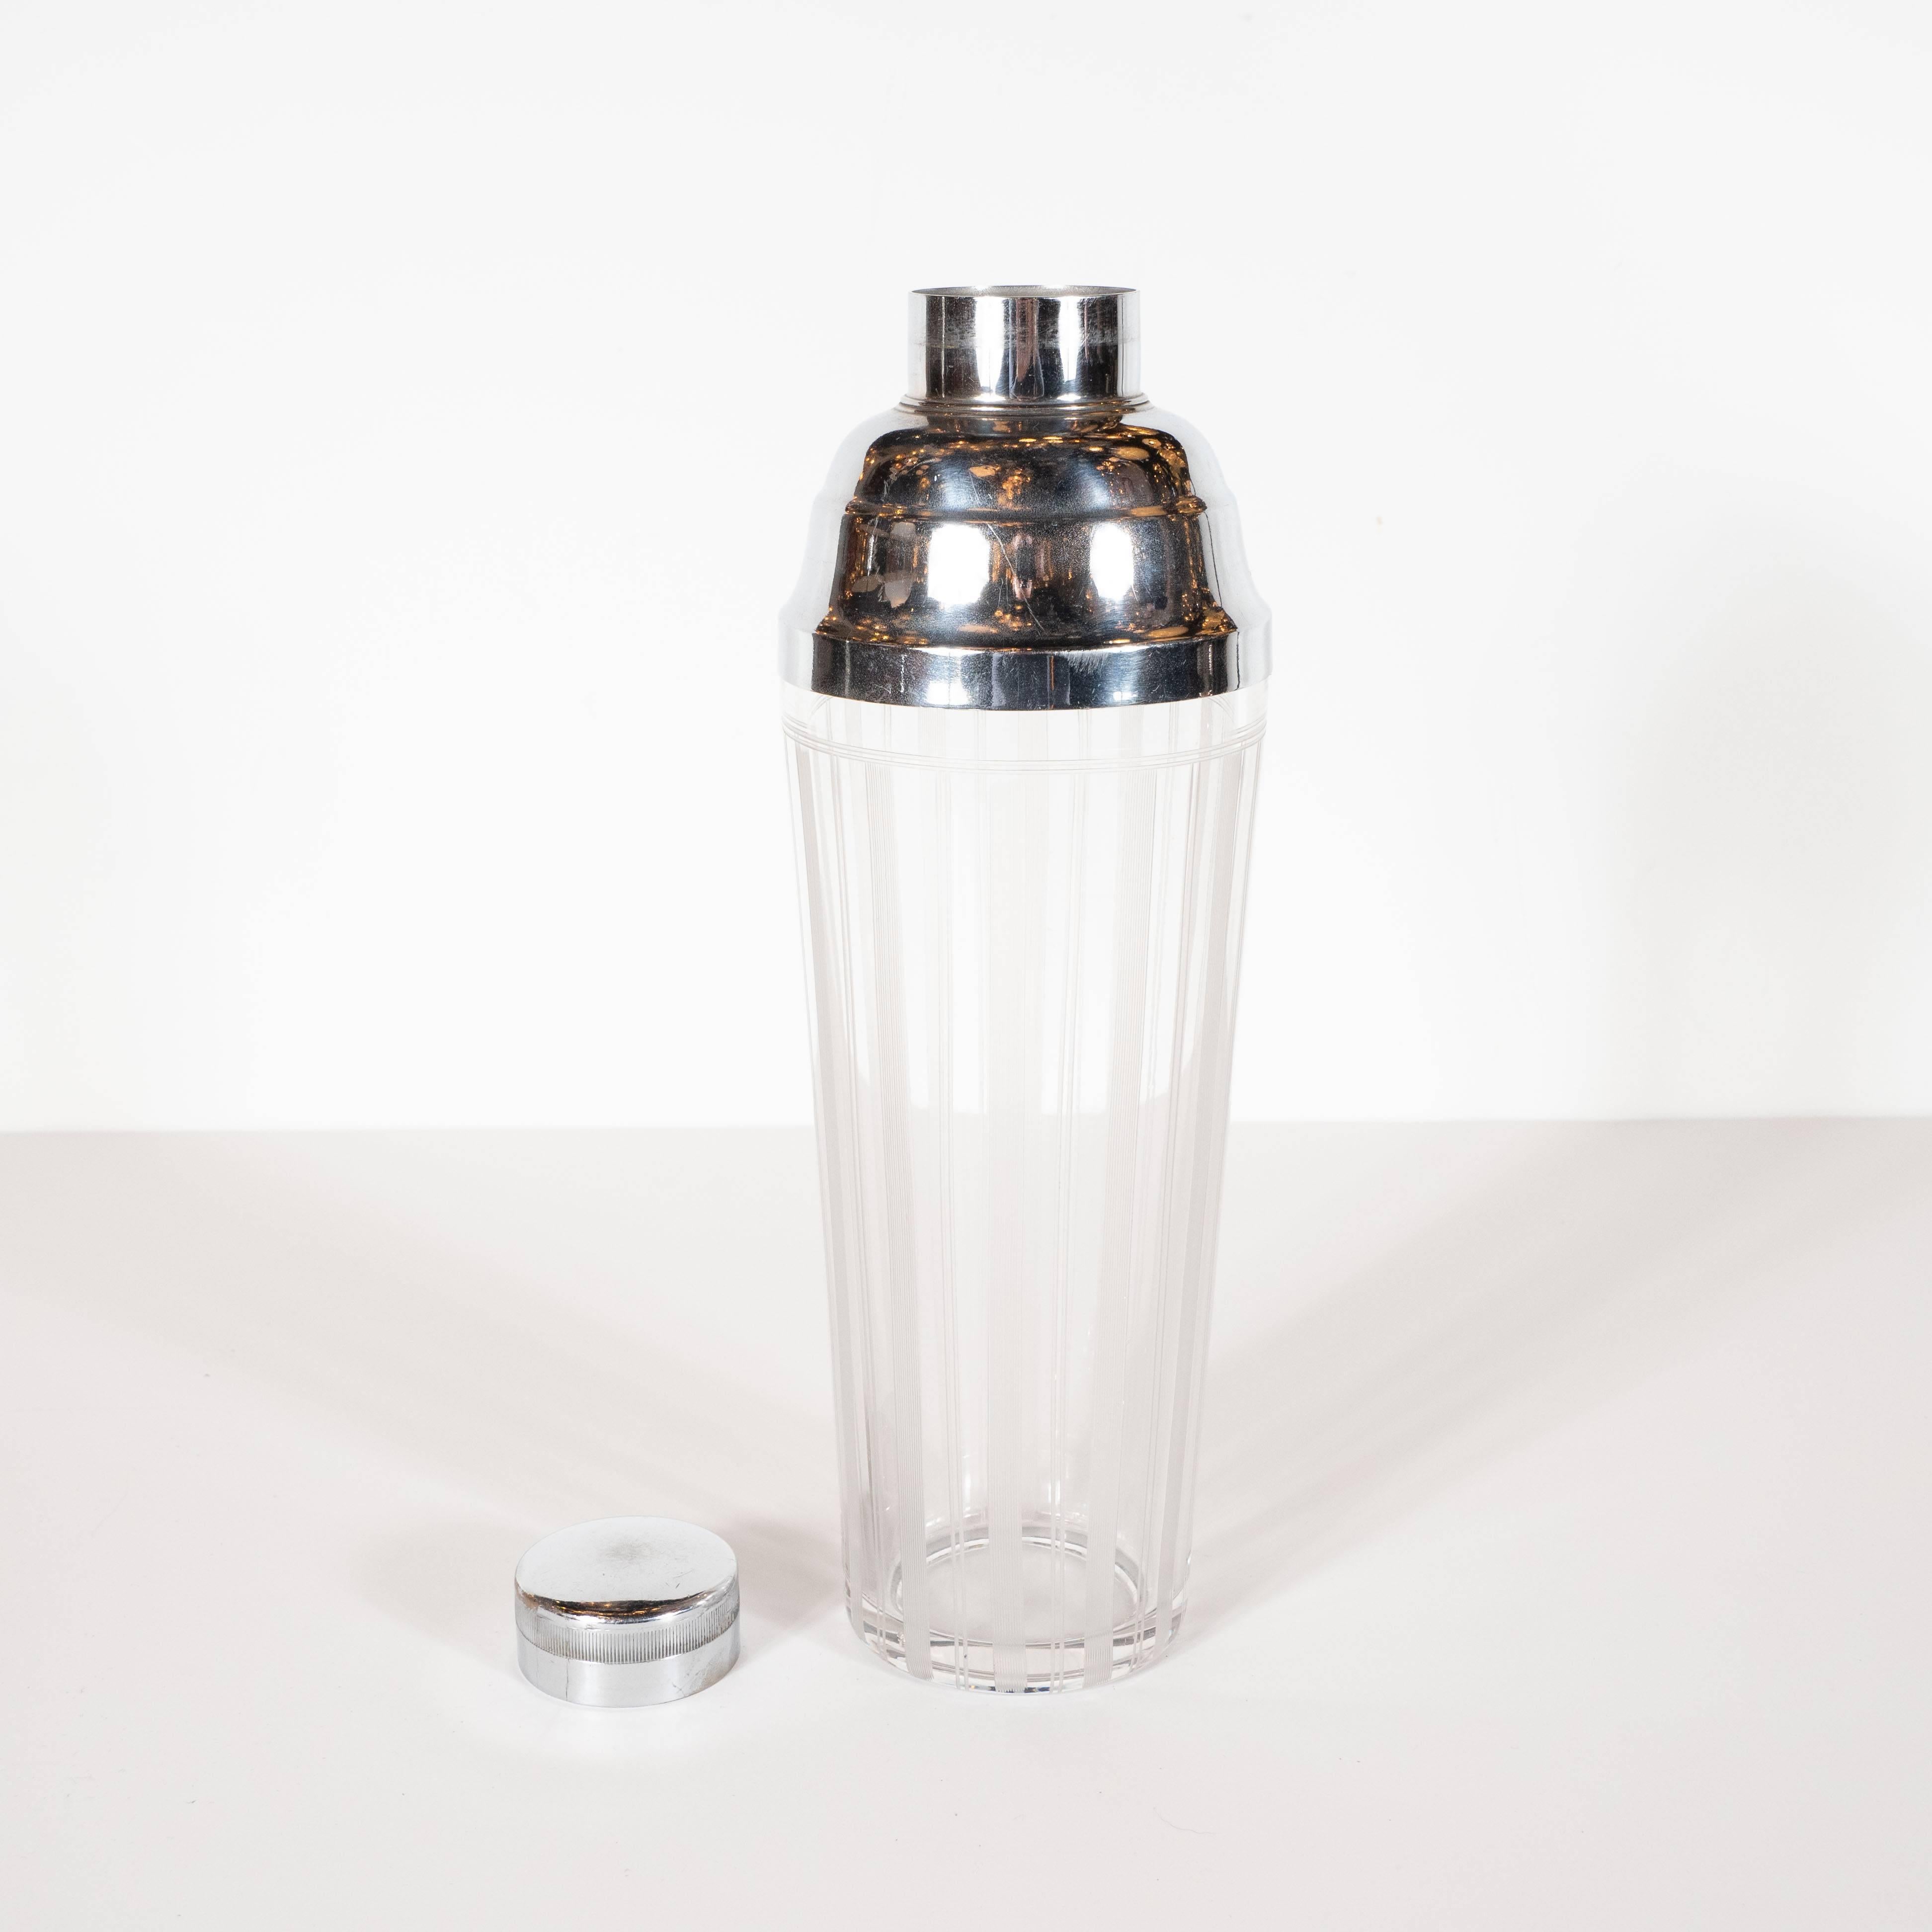 This sophisticated Art Deco cocktail shaker was realized in the United States, circa 1935. It features a gently expanding conical body with a wealth of etched vertical striations. These lines- alternating between pairs and striped bands- culminating